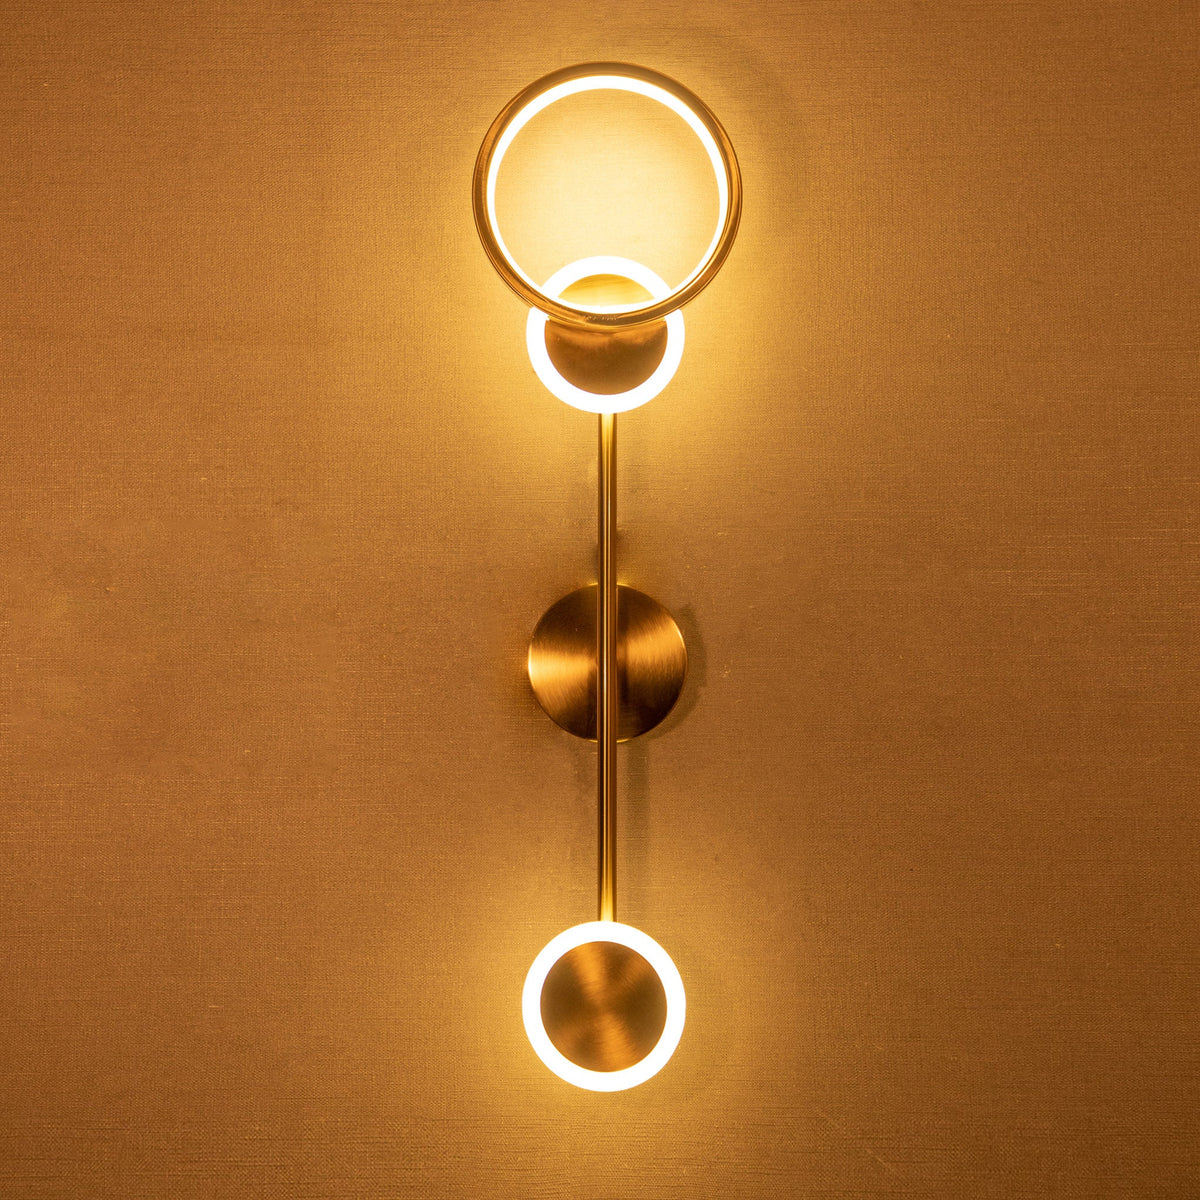 Lost Glory LED Wall Light online